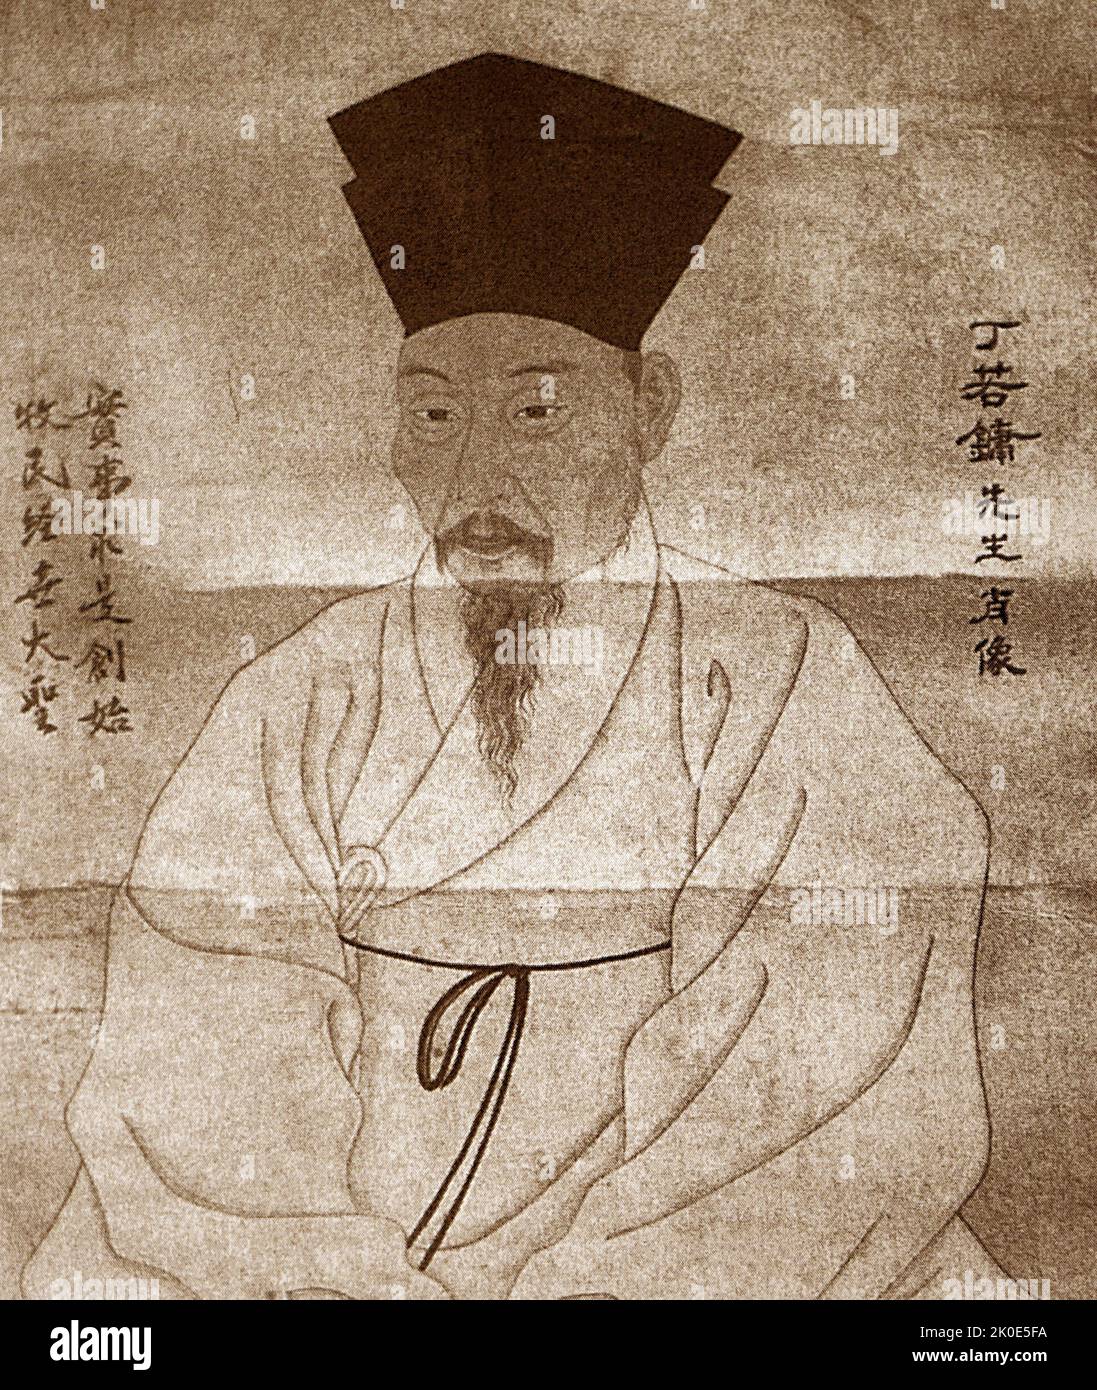 Jeong Yakyong Jung Yak-Yong (1762 - 1836), often simply known as Dasan (the mountain of tea), was one of the greatest thinkers in the later Joseon dynasty period, wrote highly influential books about philosophy, science and theories of government, held significant administrative positions, and was noted as a poet. Stock Photo